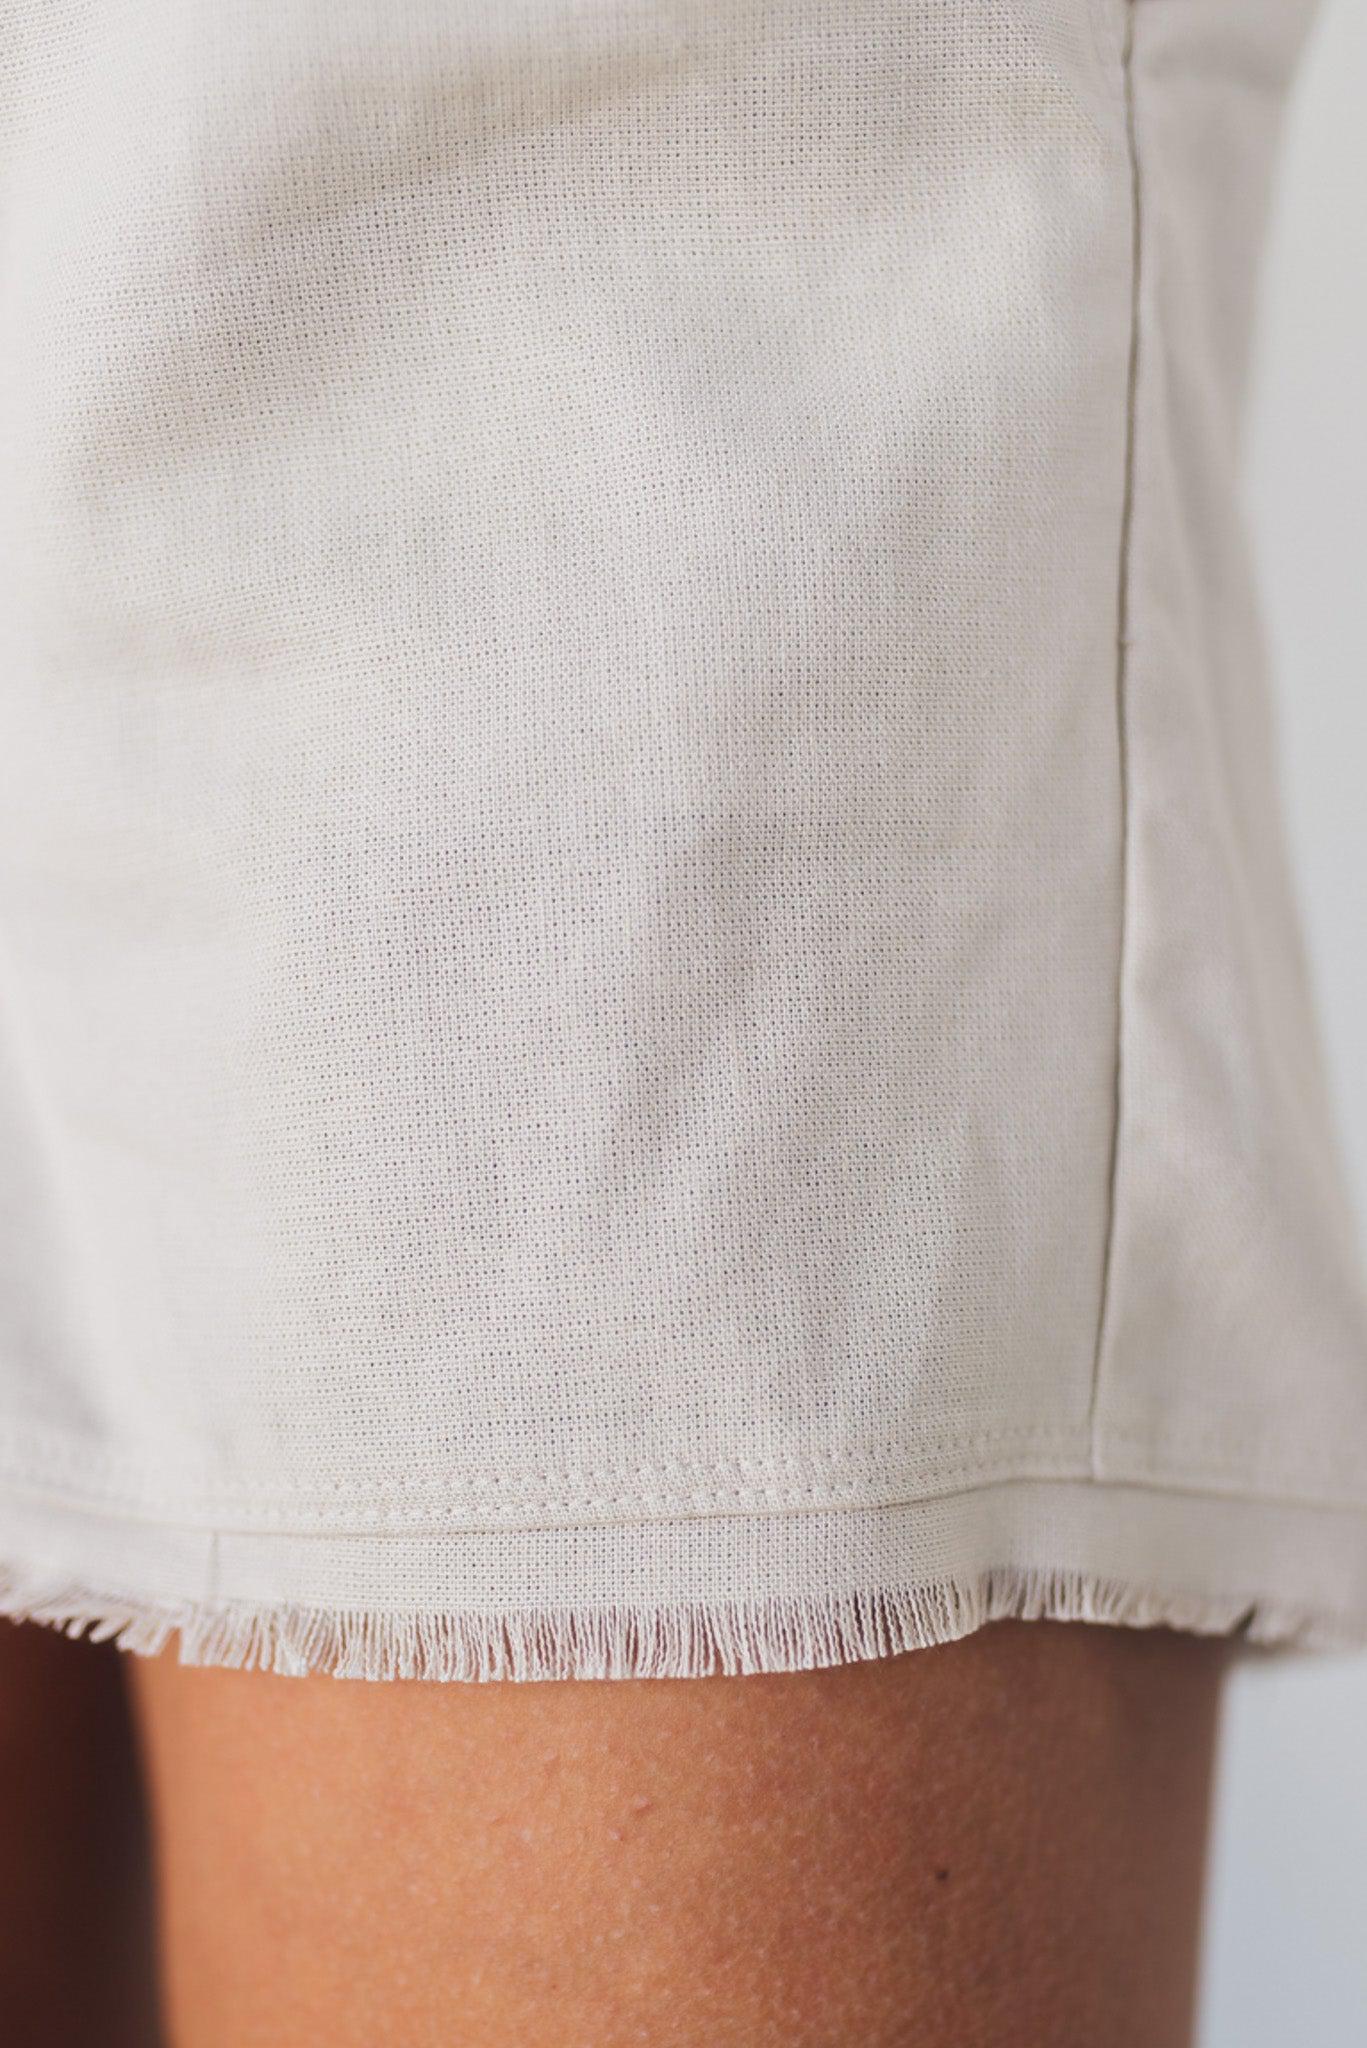 Linen blend natural color shorts with drawstring waist band and smocked detail.